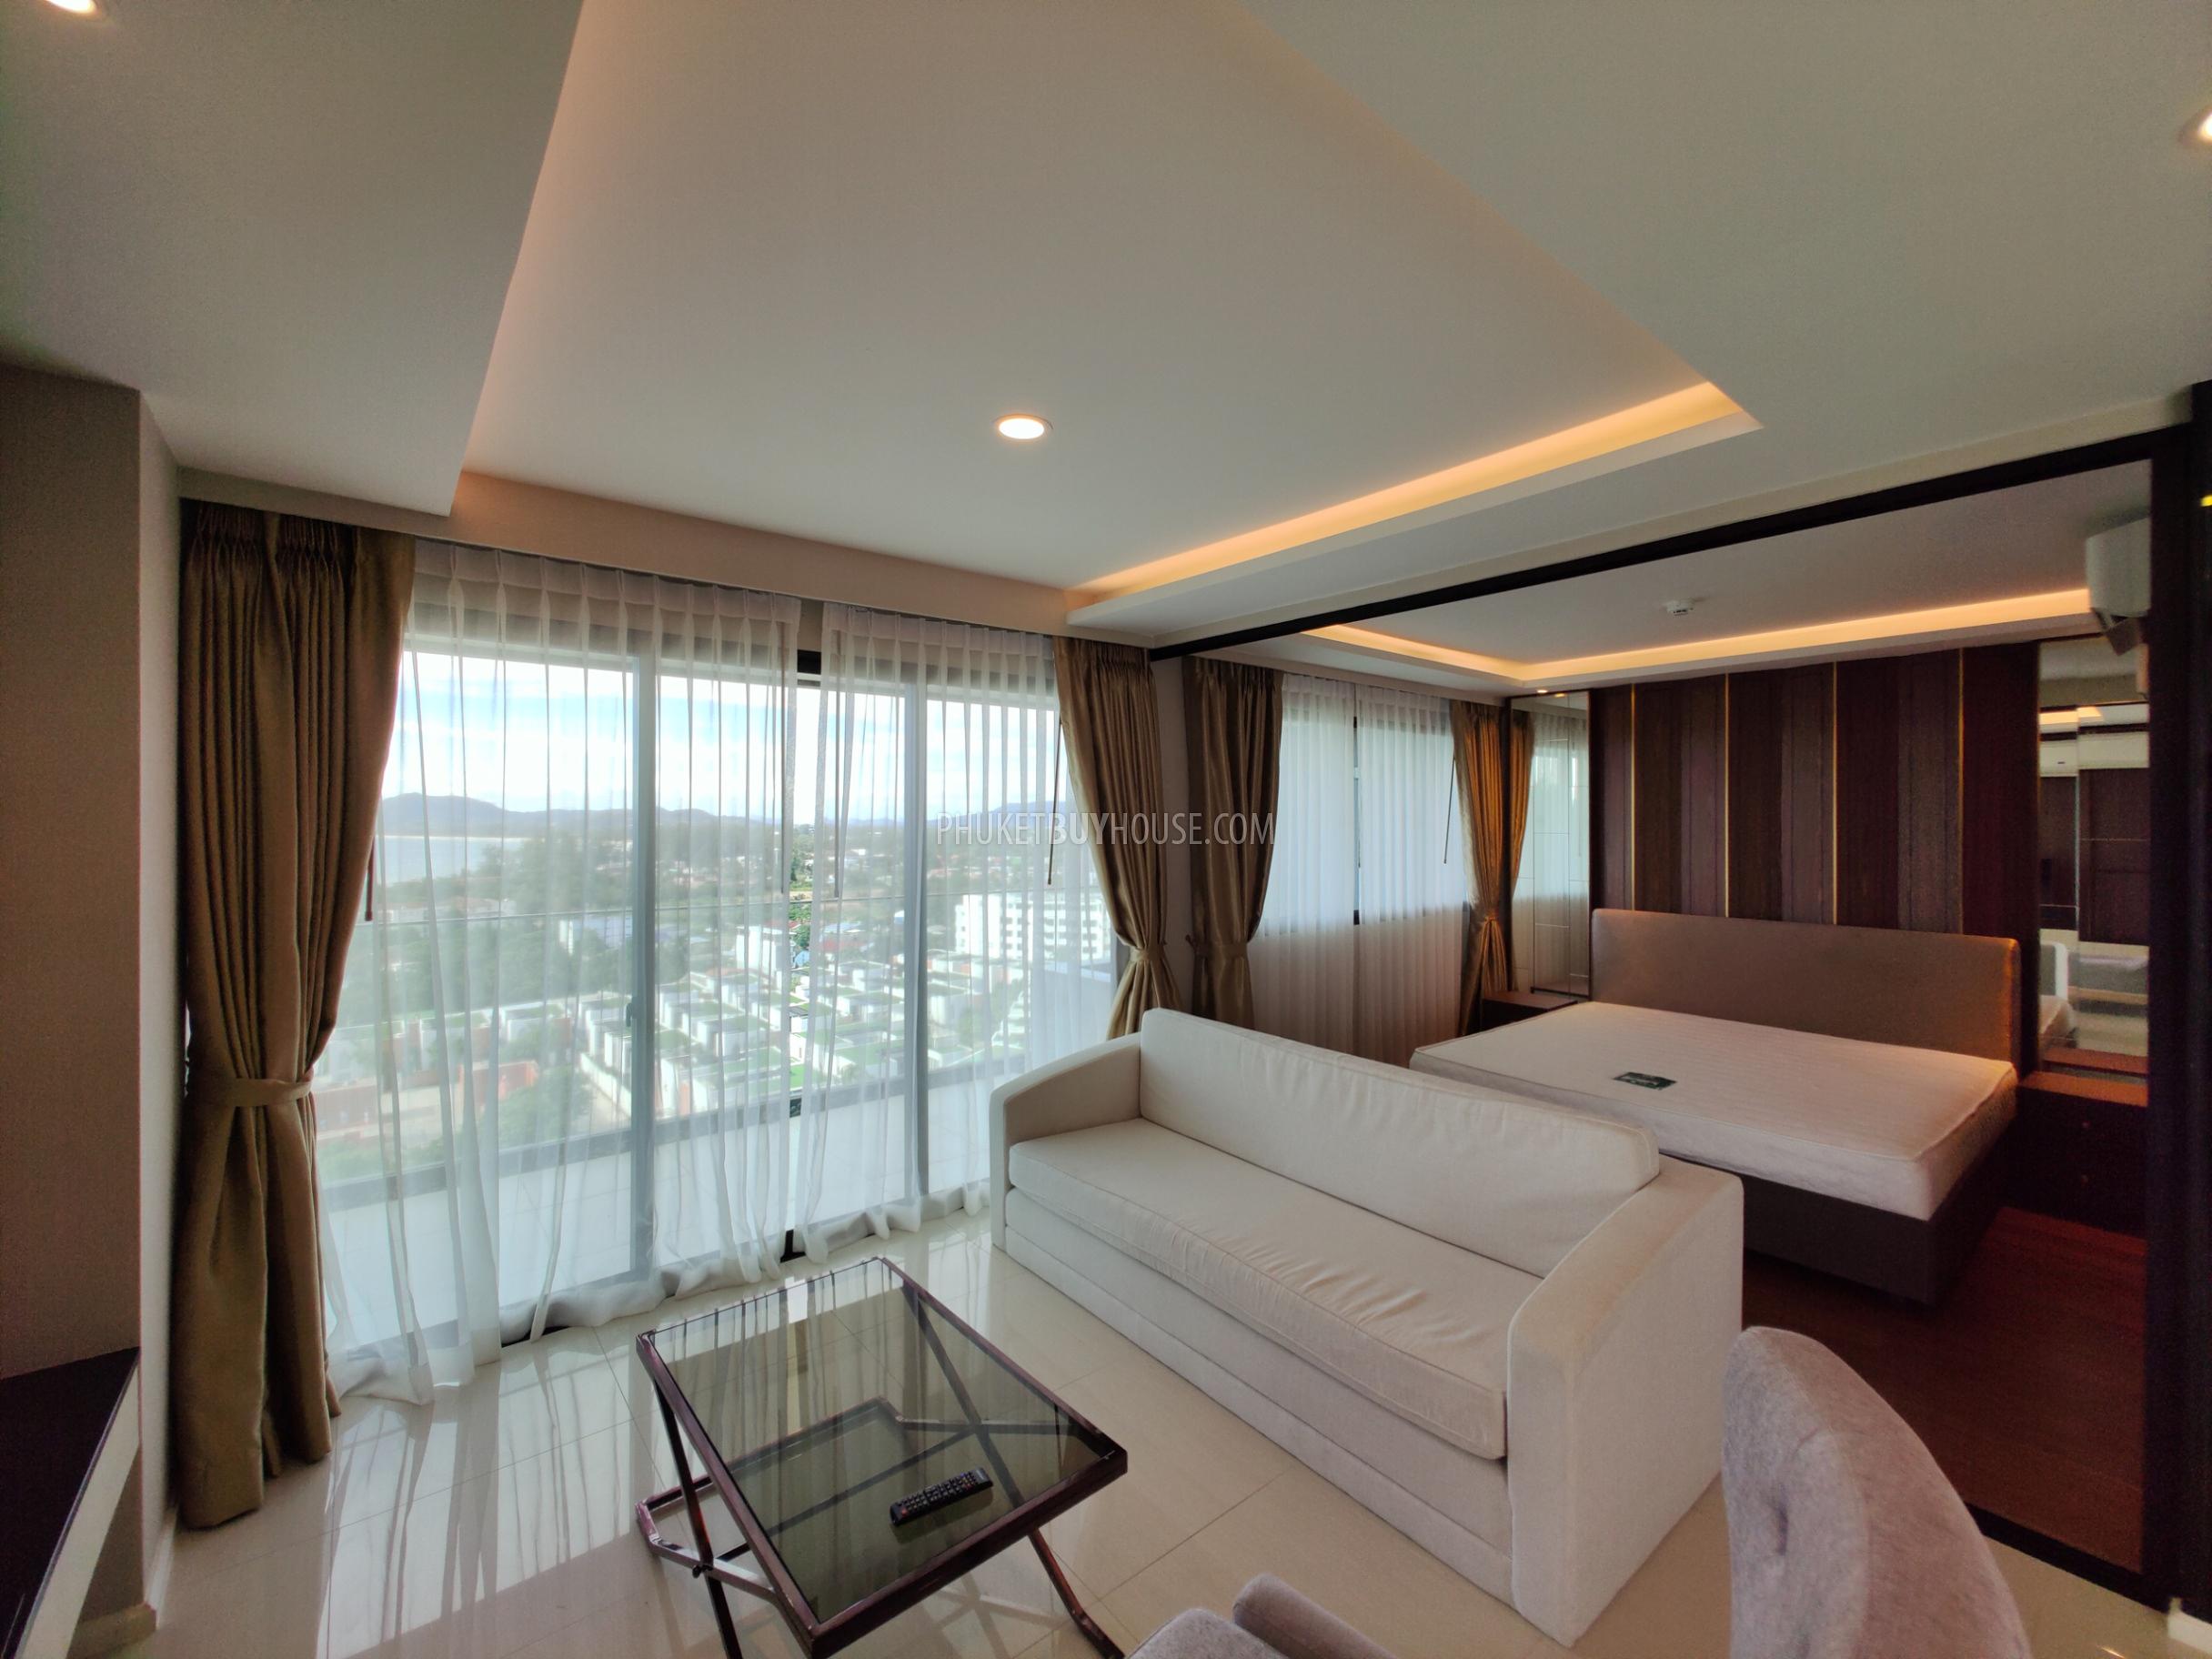 SUR22000: Irresistible Panoramic View from This Three Bedroom Apartment in Surin. Photo #30